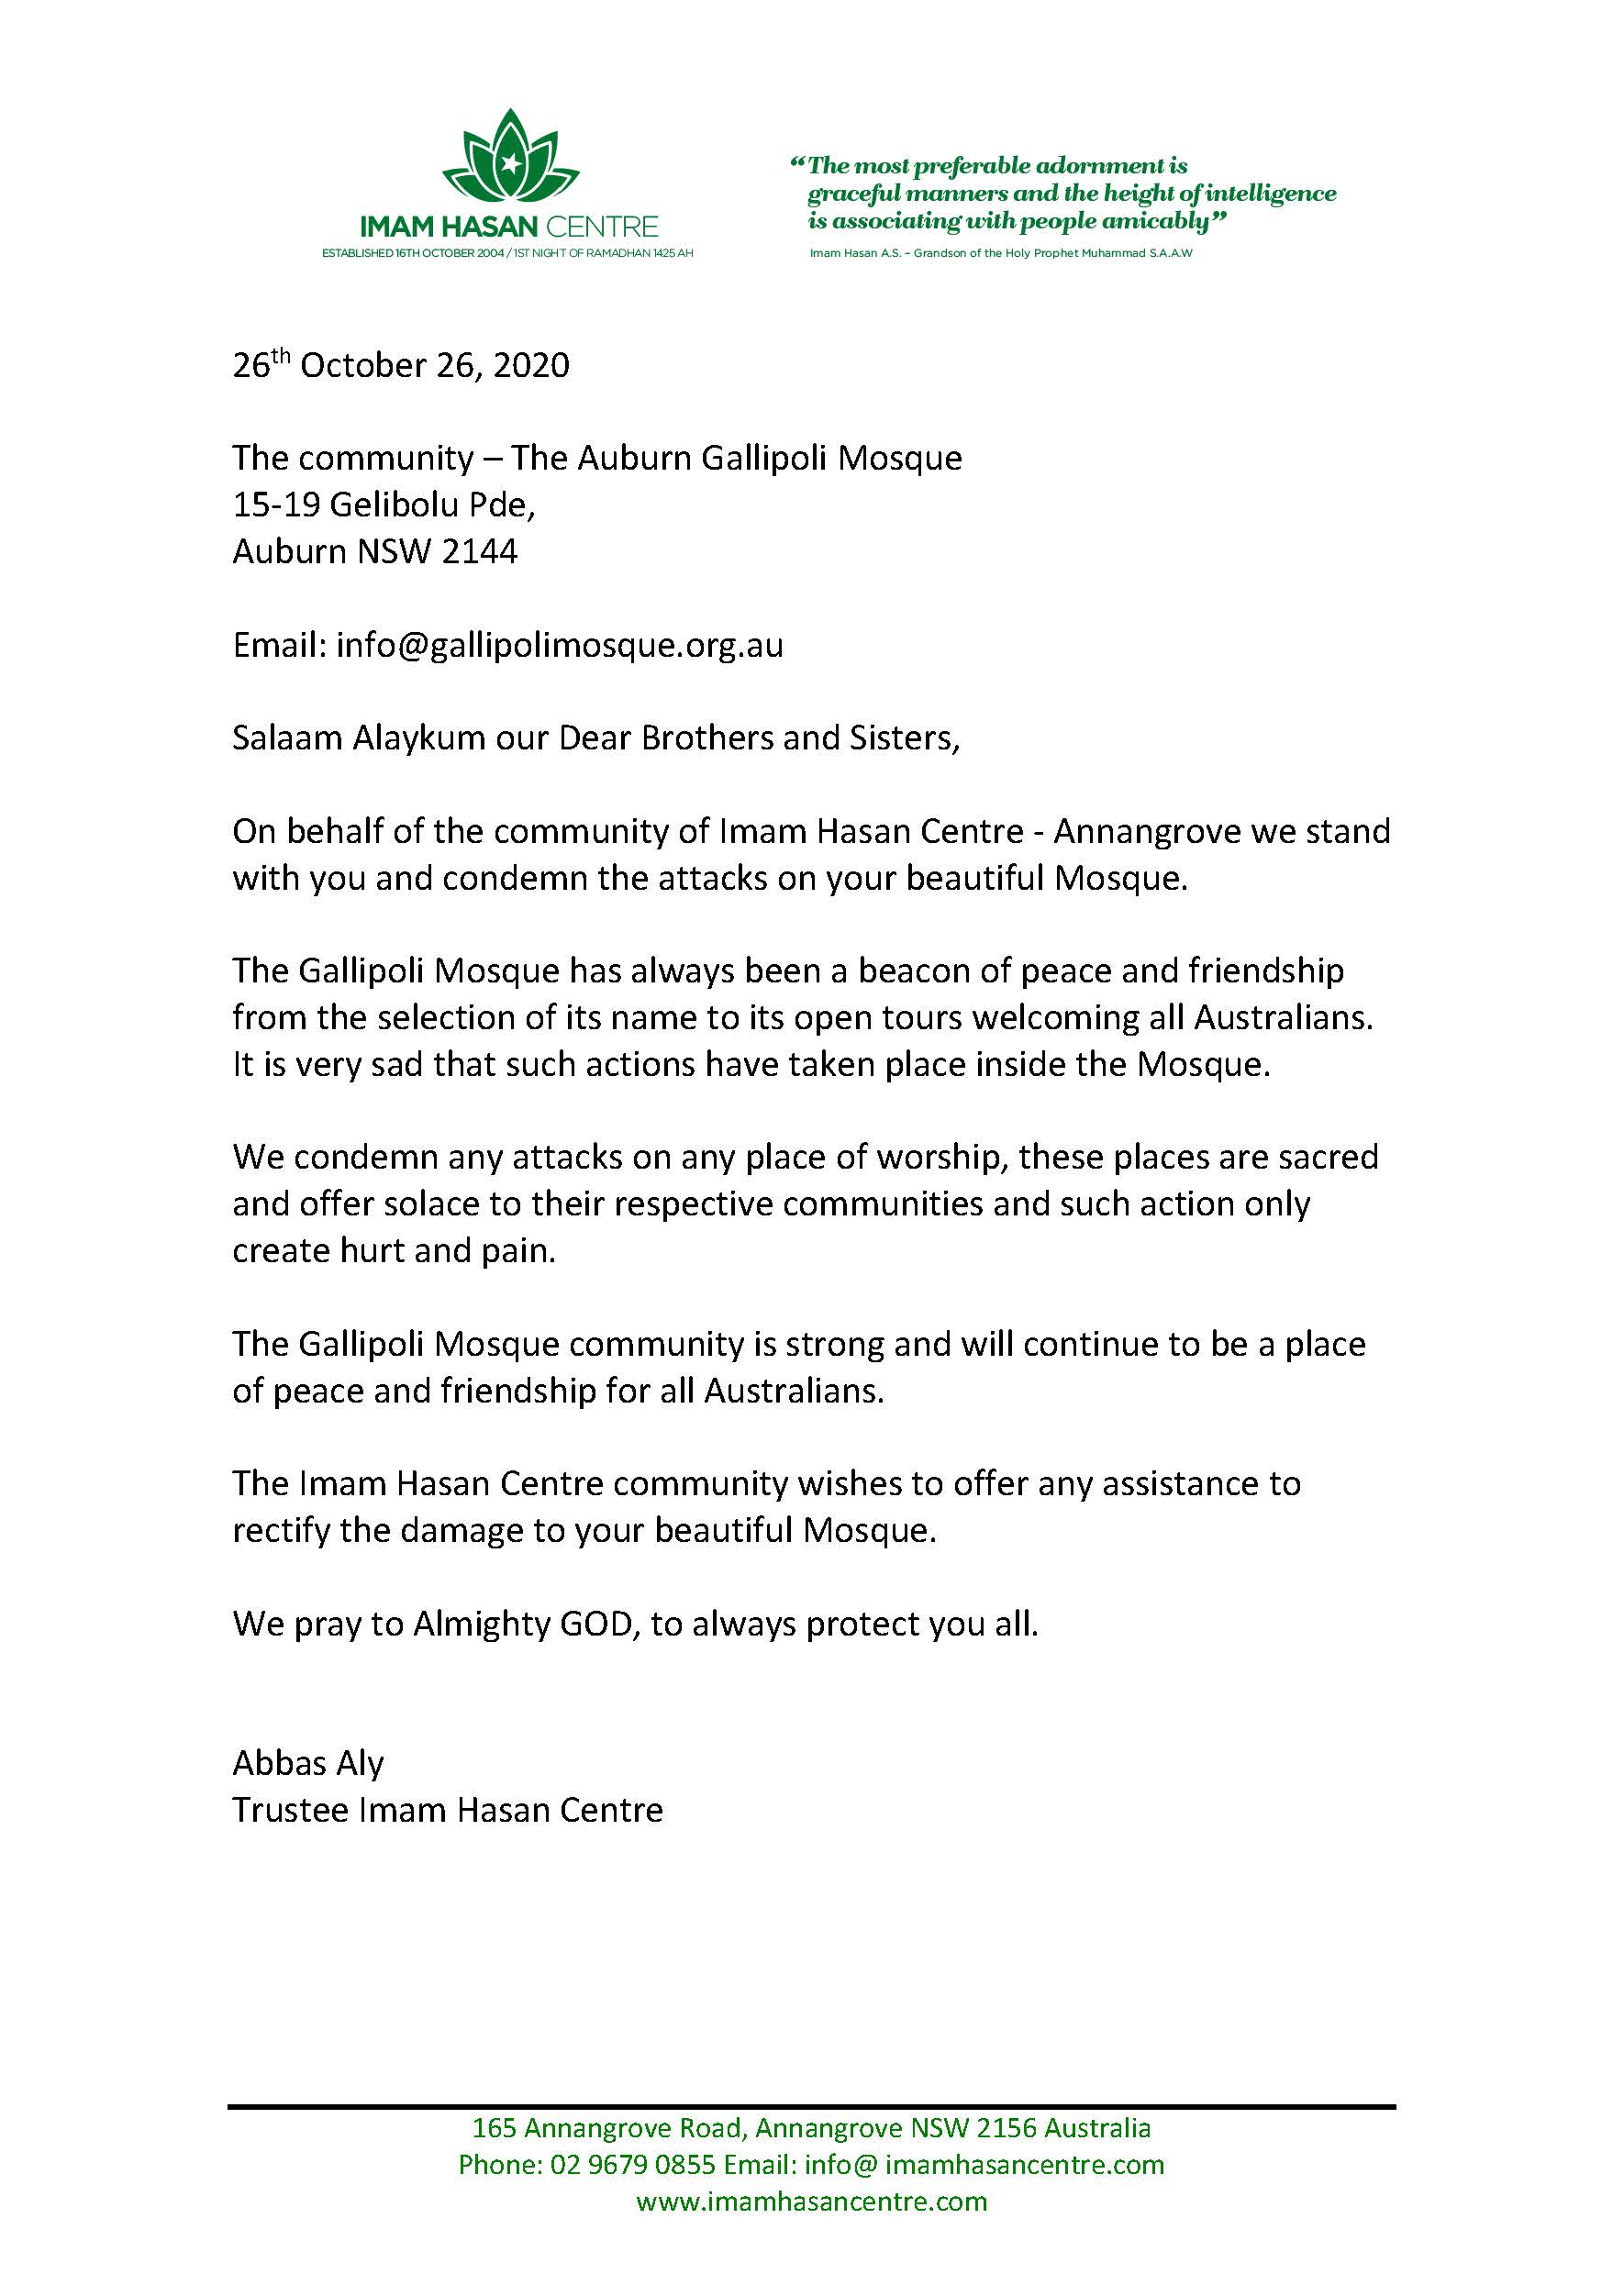 Letter of Support for the Auburn Gallipoli Mosque – 26/10/2020 – 1.22 PM